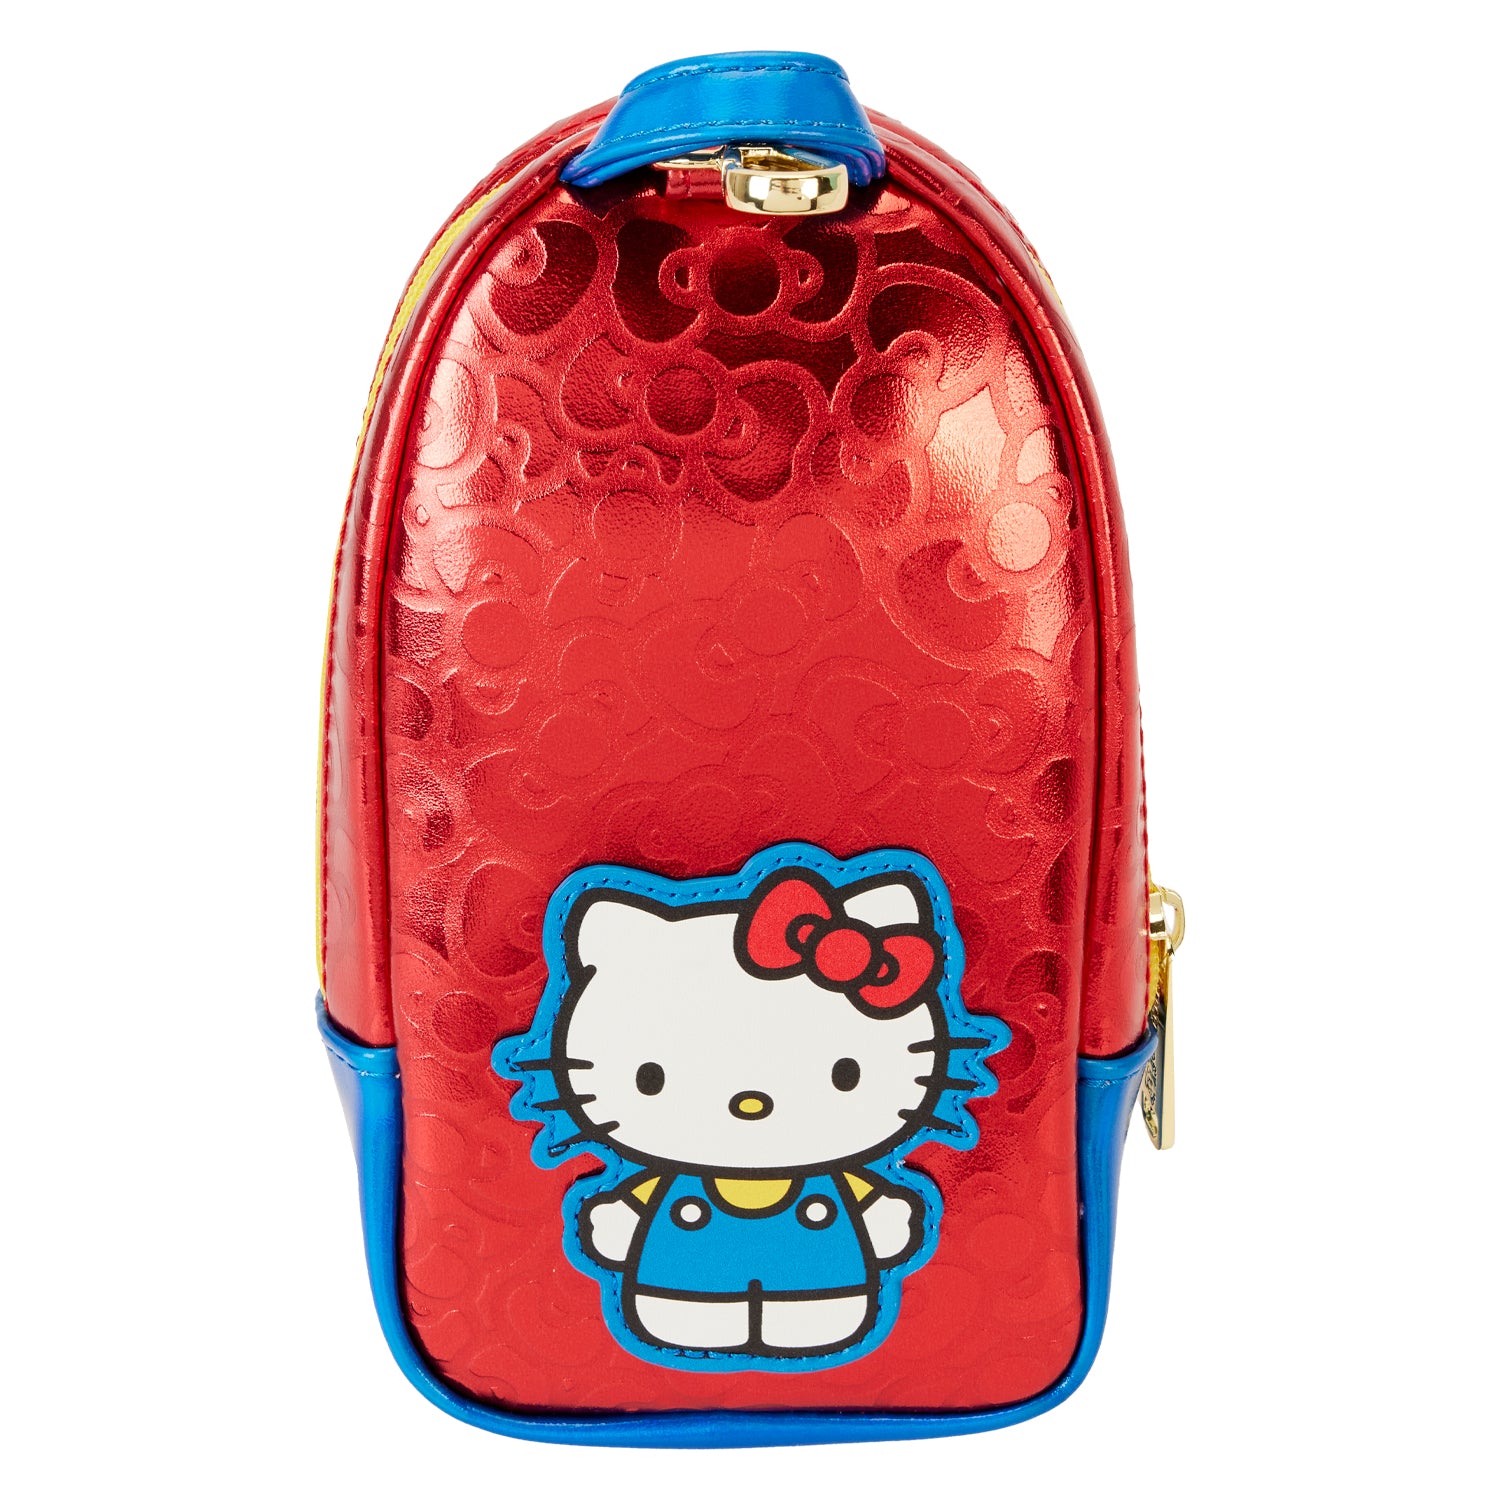 Loungefly Sanrio Hello Kitty 50th Anniversary Stationery Pencil Case